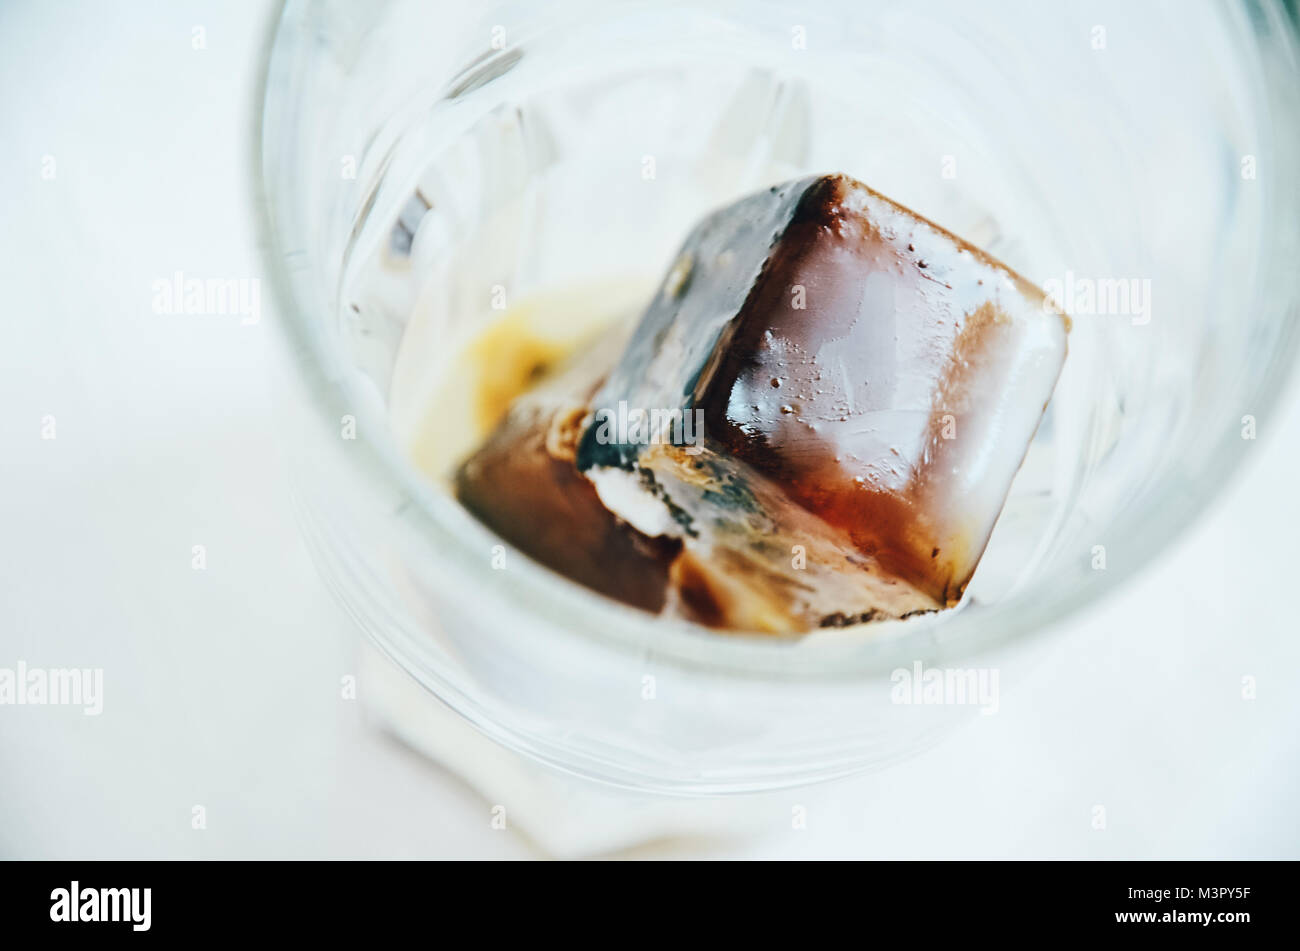 https://c8.alamy.com/comp/M3PY5F/ice-cubes-made-with-coffee-in-glass-to-prepare-refreshing-coffee-drinks-M3PY5F.jpg